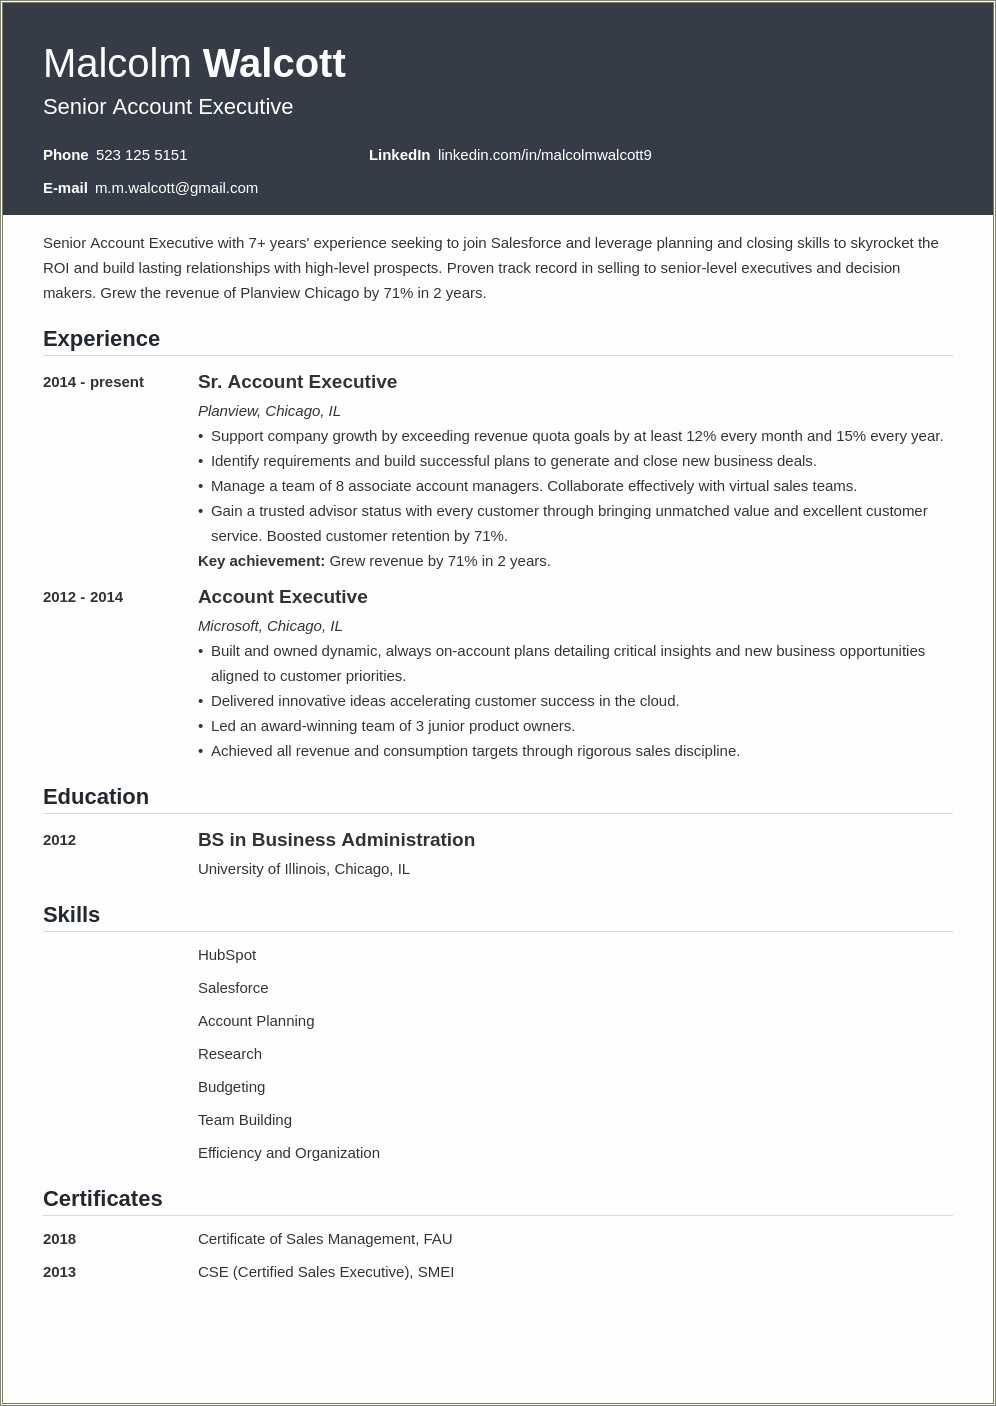 Television Account Executive Resume Samples